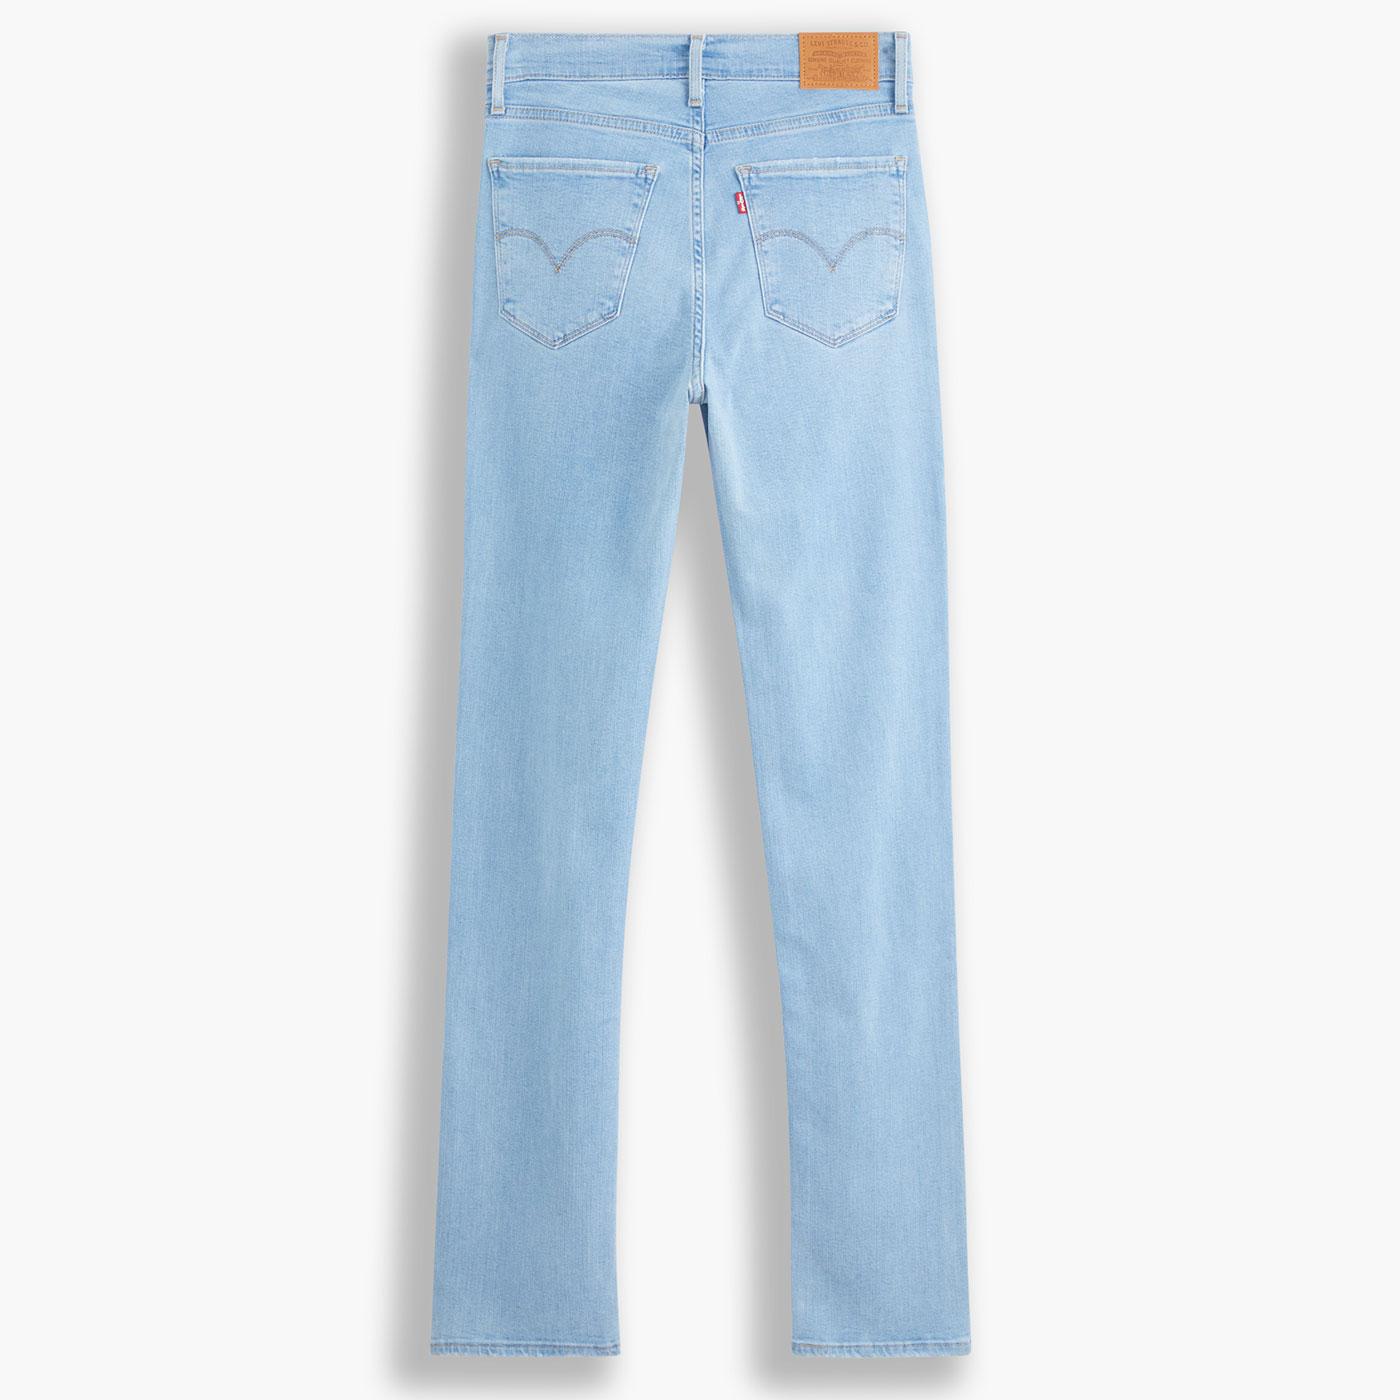 LEVI'S 724 High Rise Straight Jeans in Rio Aura Blue